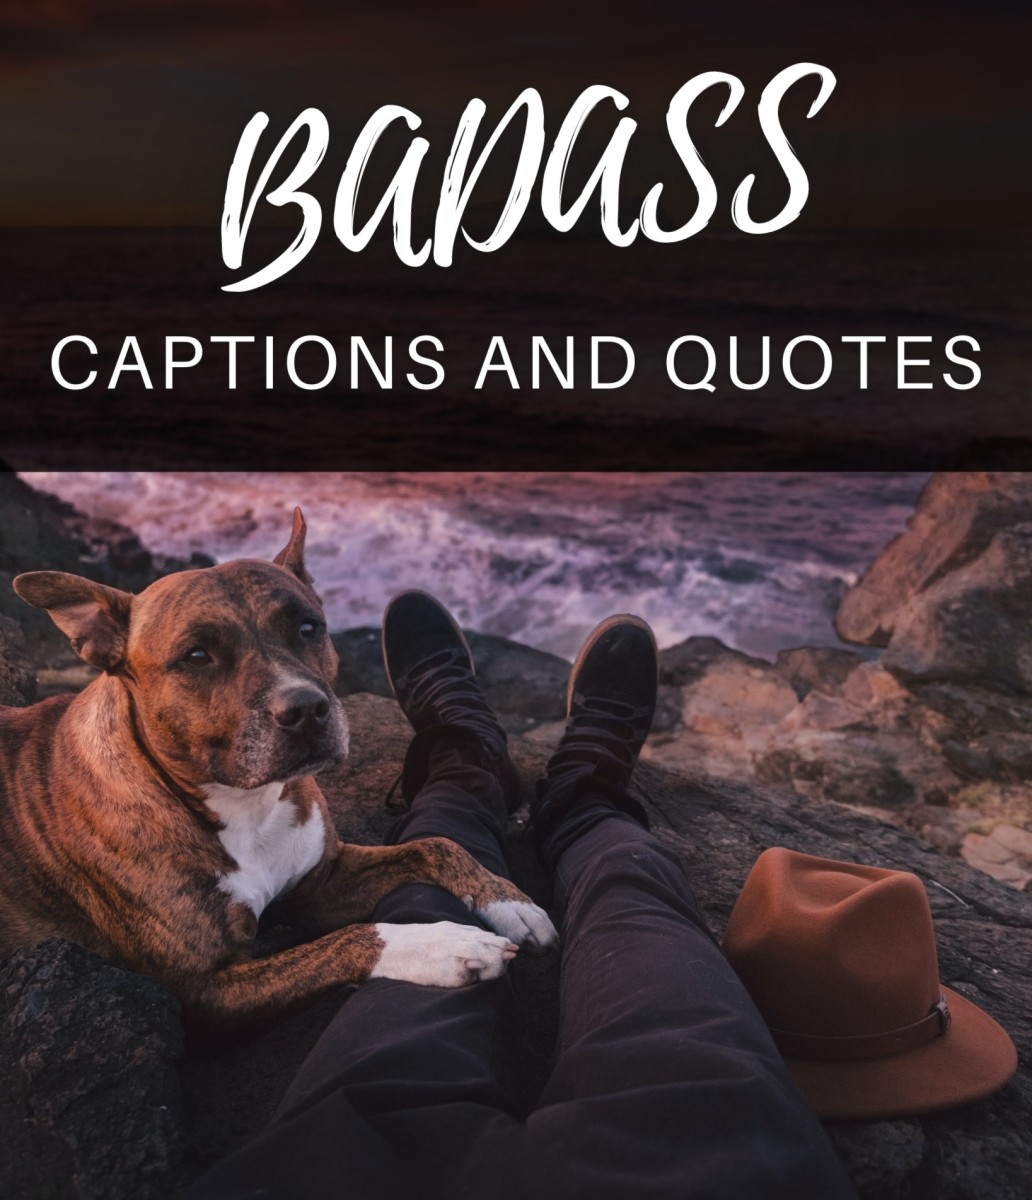 250+ Badass Quotes and Caption Ideas for Instagram - TurboFuture